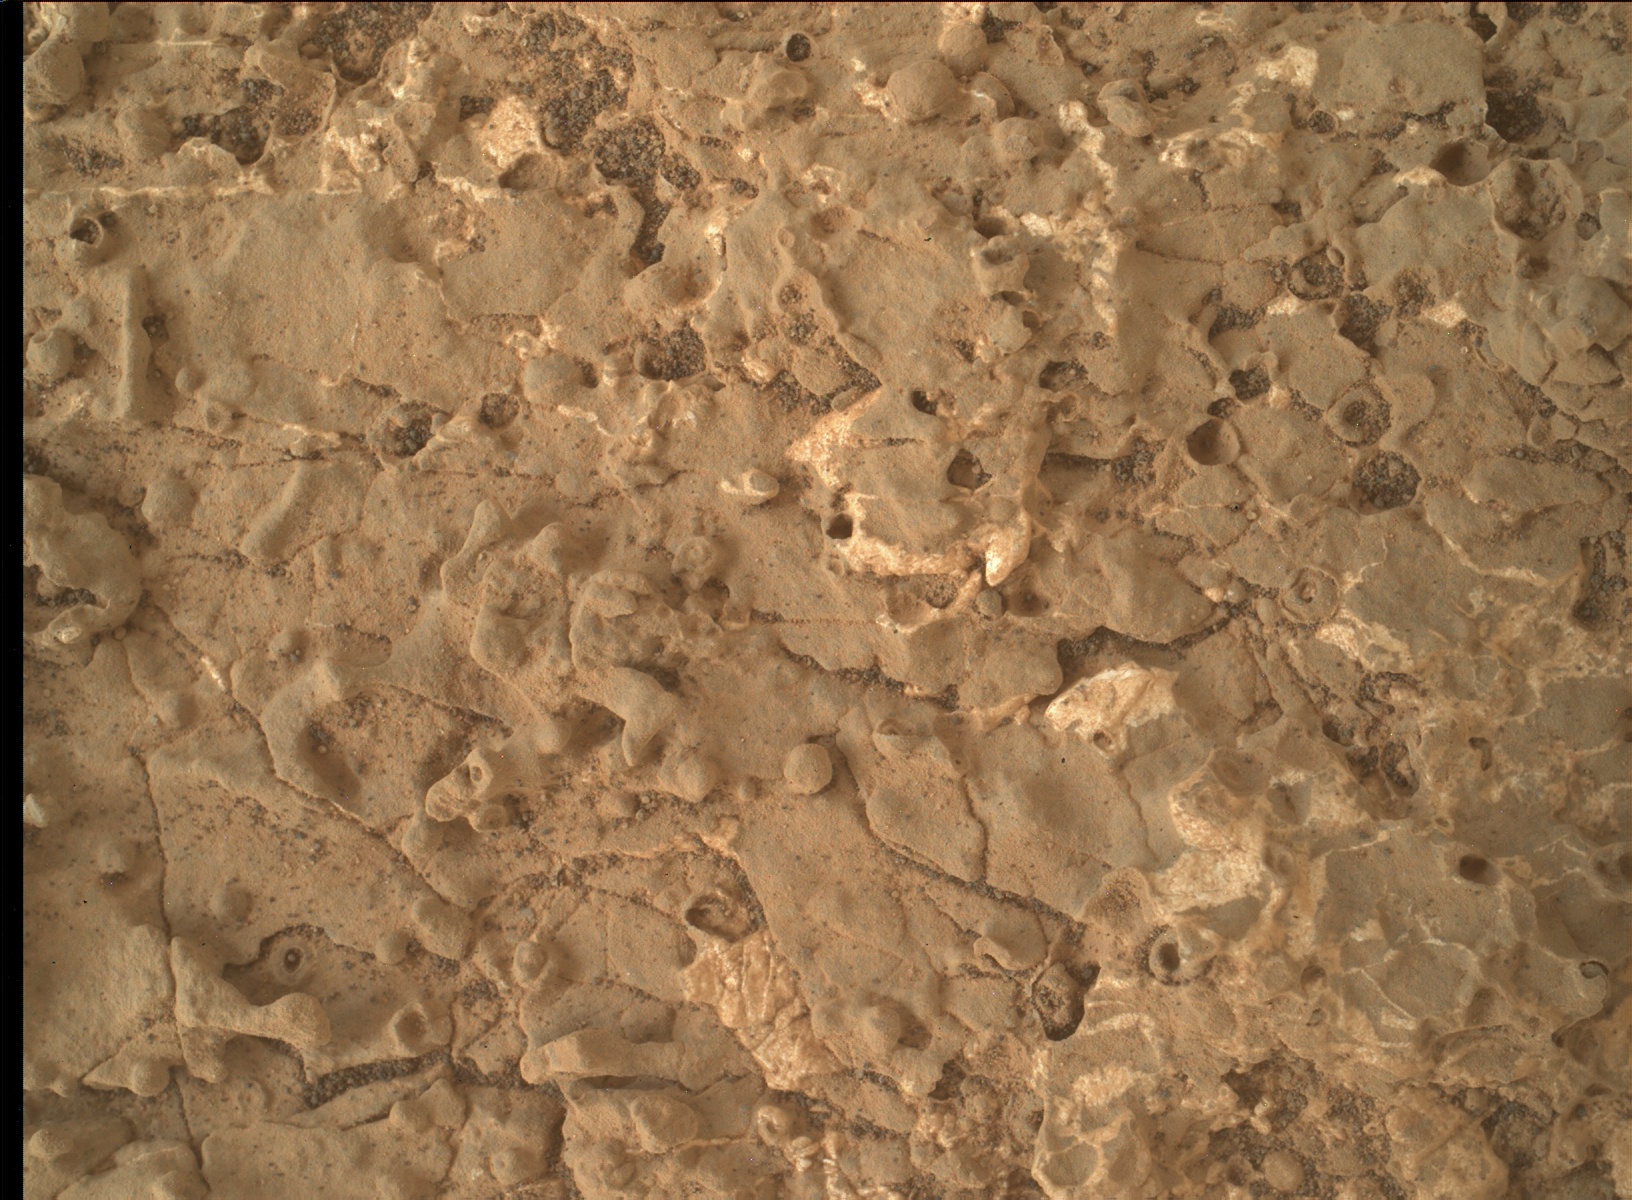 Nasa's Mars rover Curiosity acquired this image using its Mars Hand Lens Imager (MAHLI) on Sol 2660